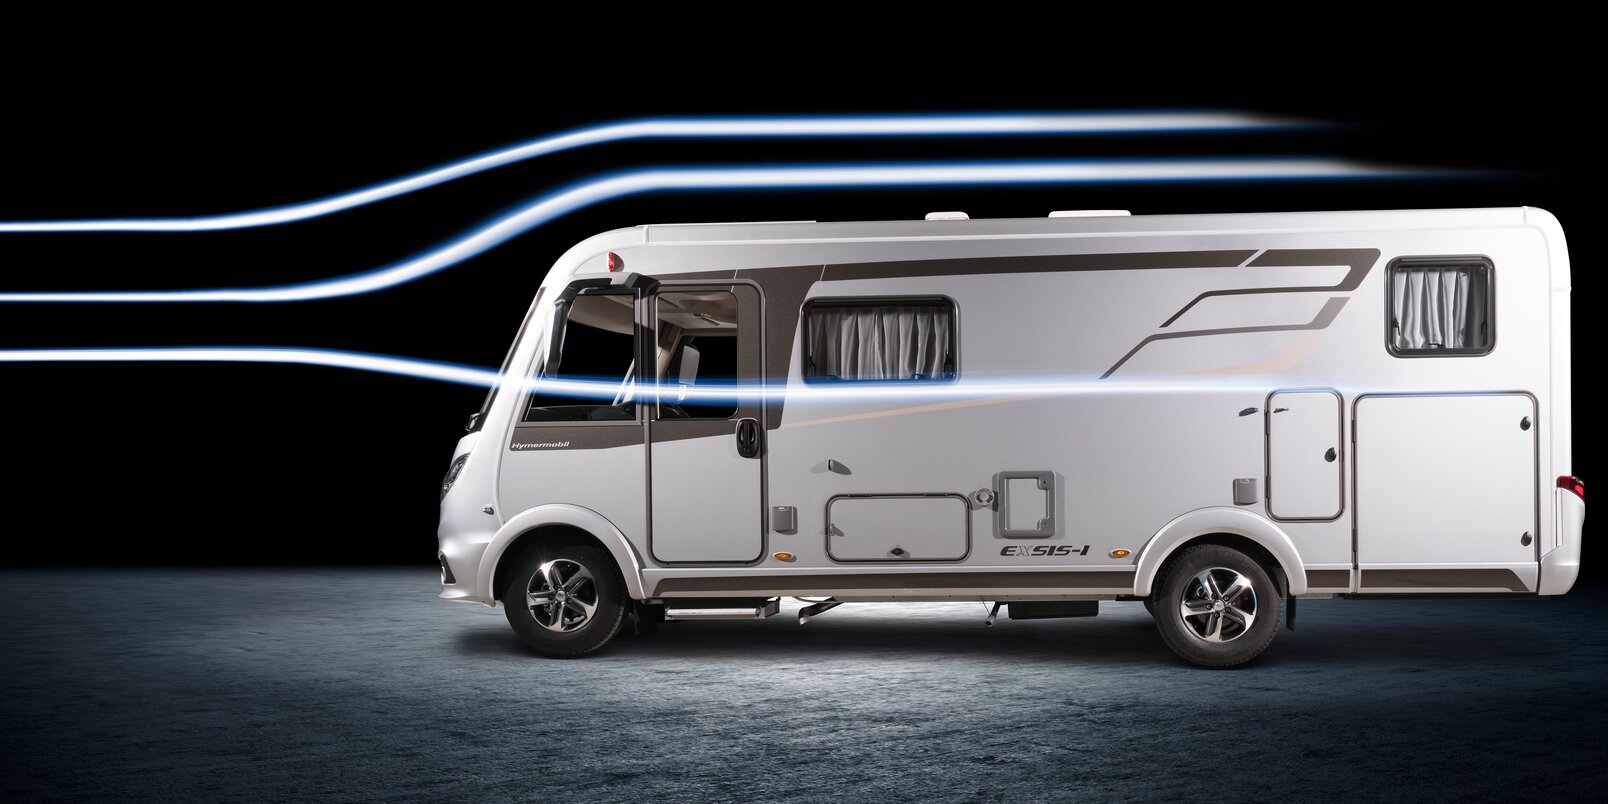 Side view of the HYMER Exsis-i motorhome in the headlights